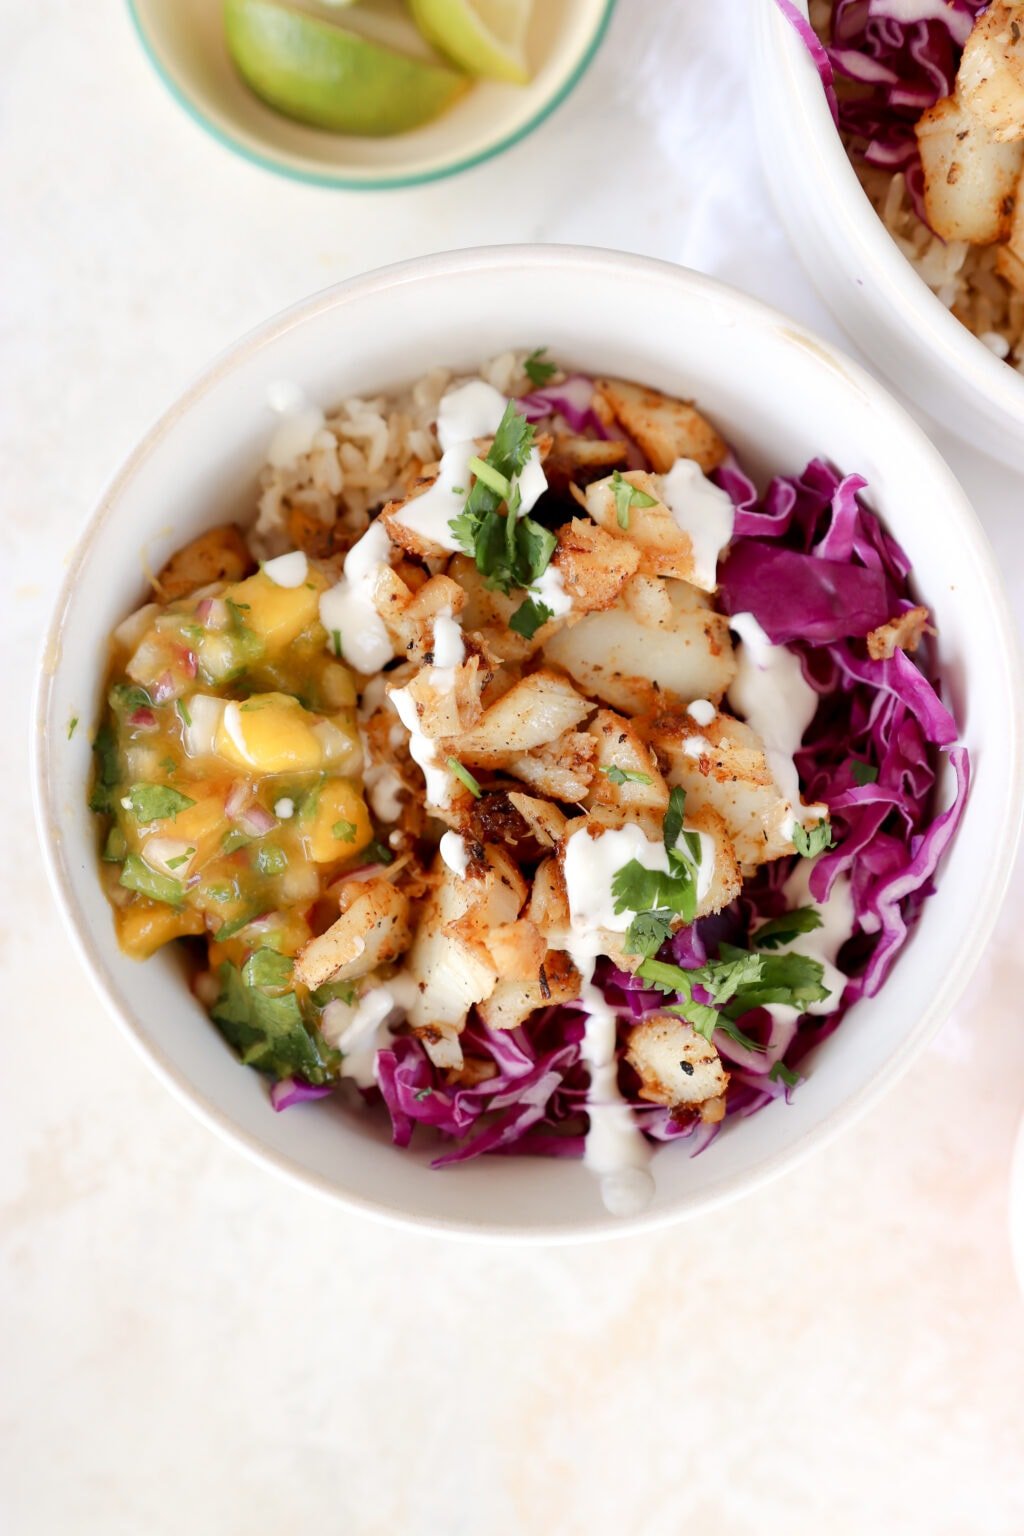 A white bowl is in the center of the photo. It is filled with brown rice, purple cabbage, mango habanero salsa, and cajun cod. The dish is topped with a drizzle of white sauce and cilantro.